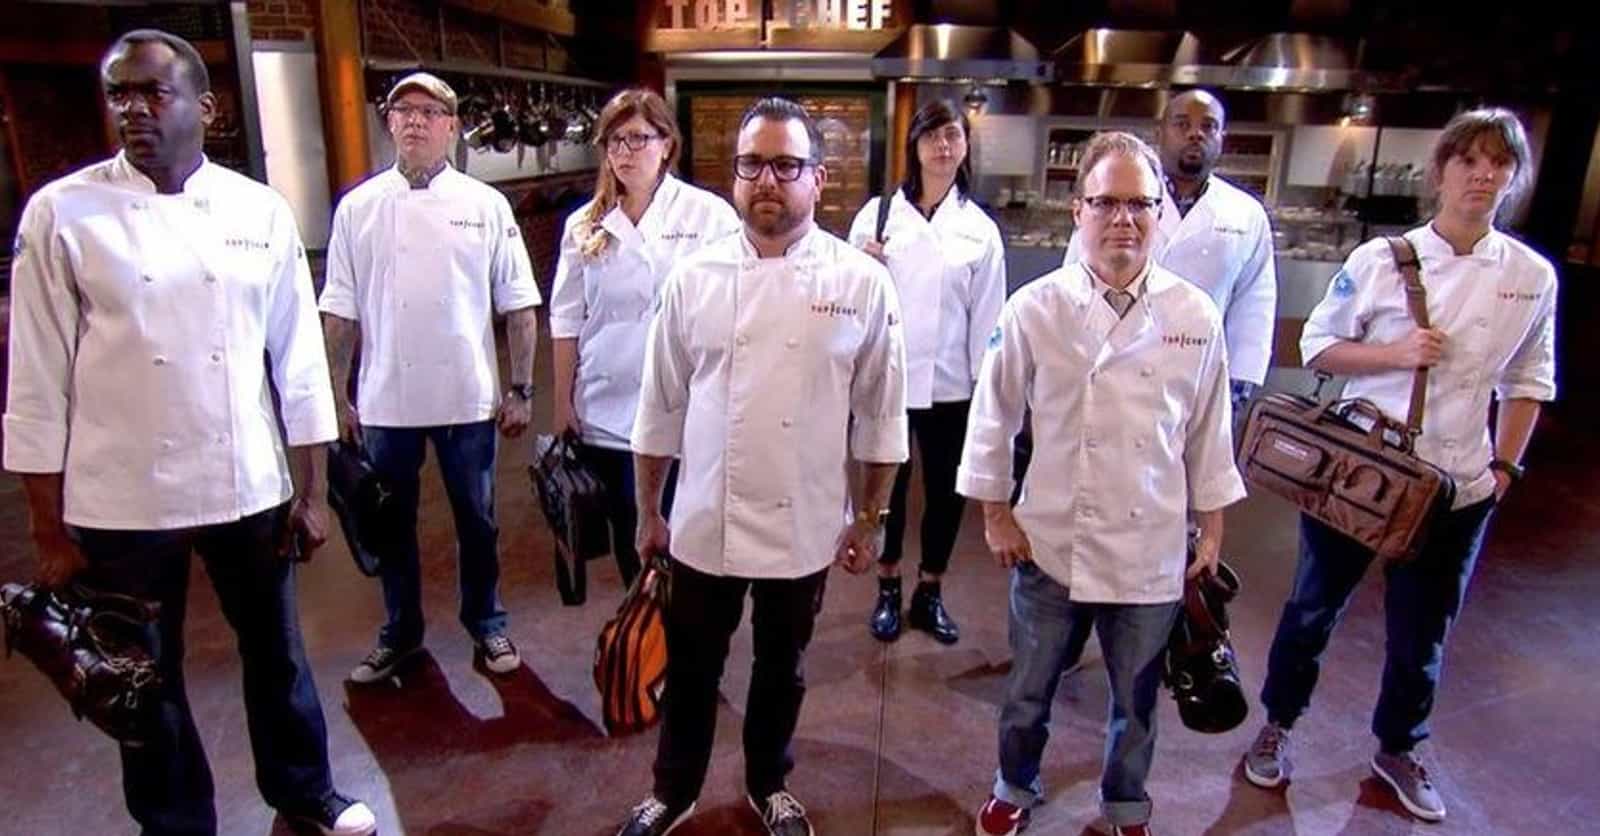 The Most Watchable Cooking Competition Shows